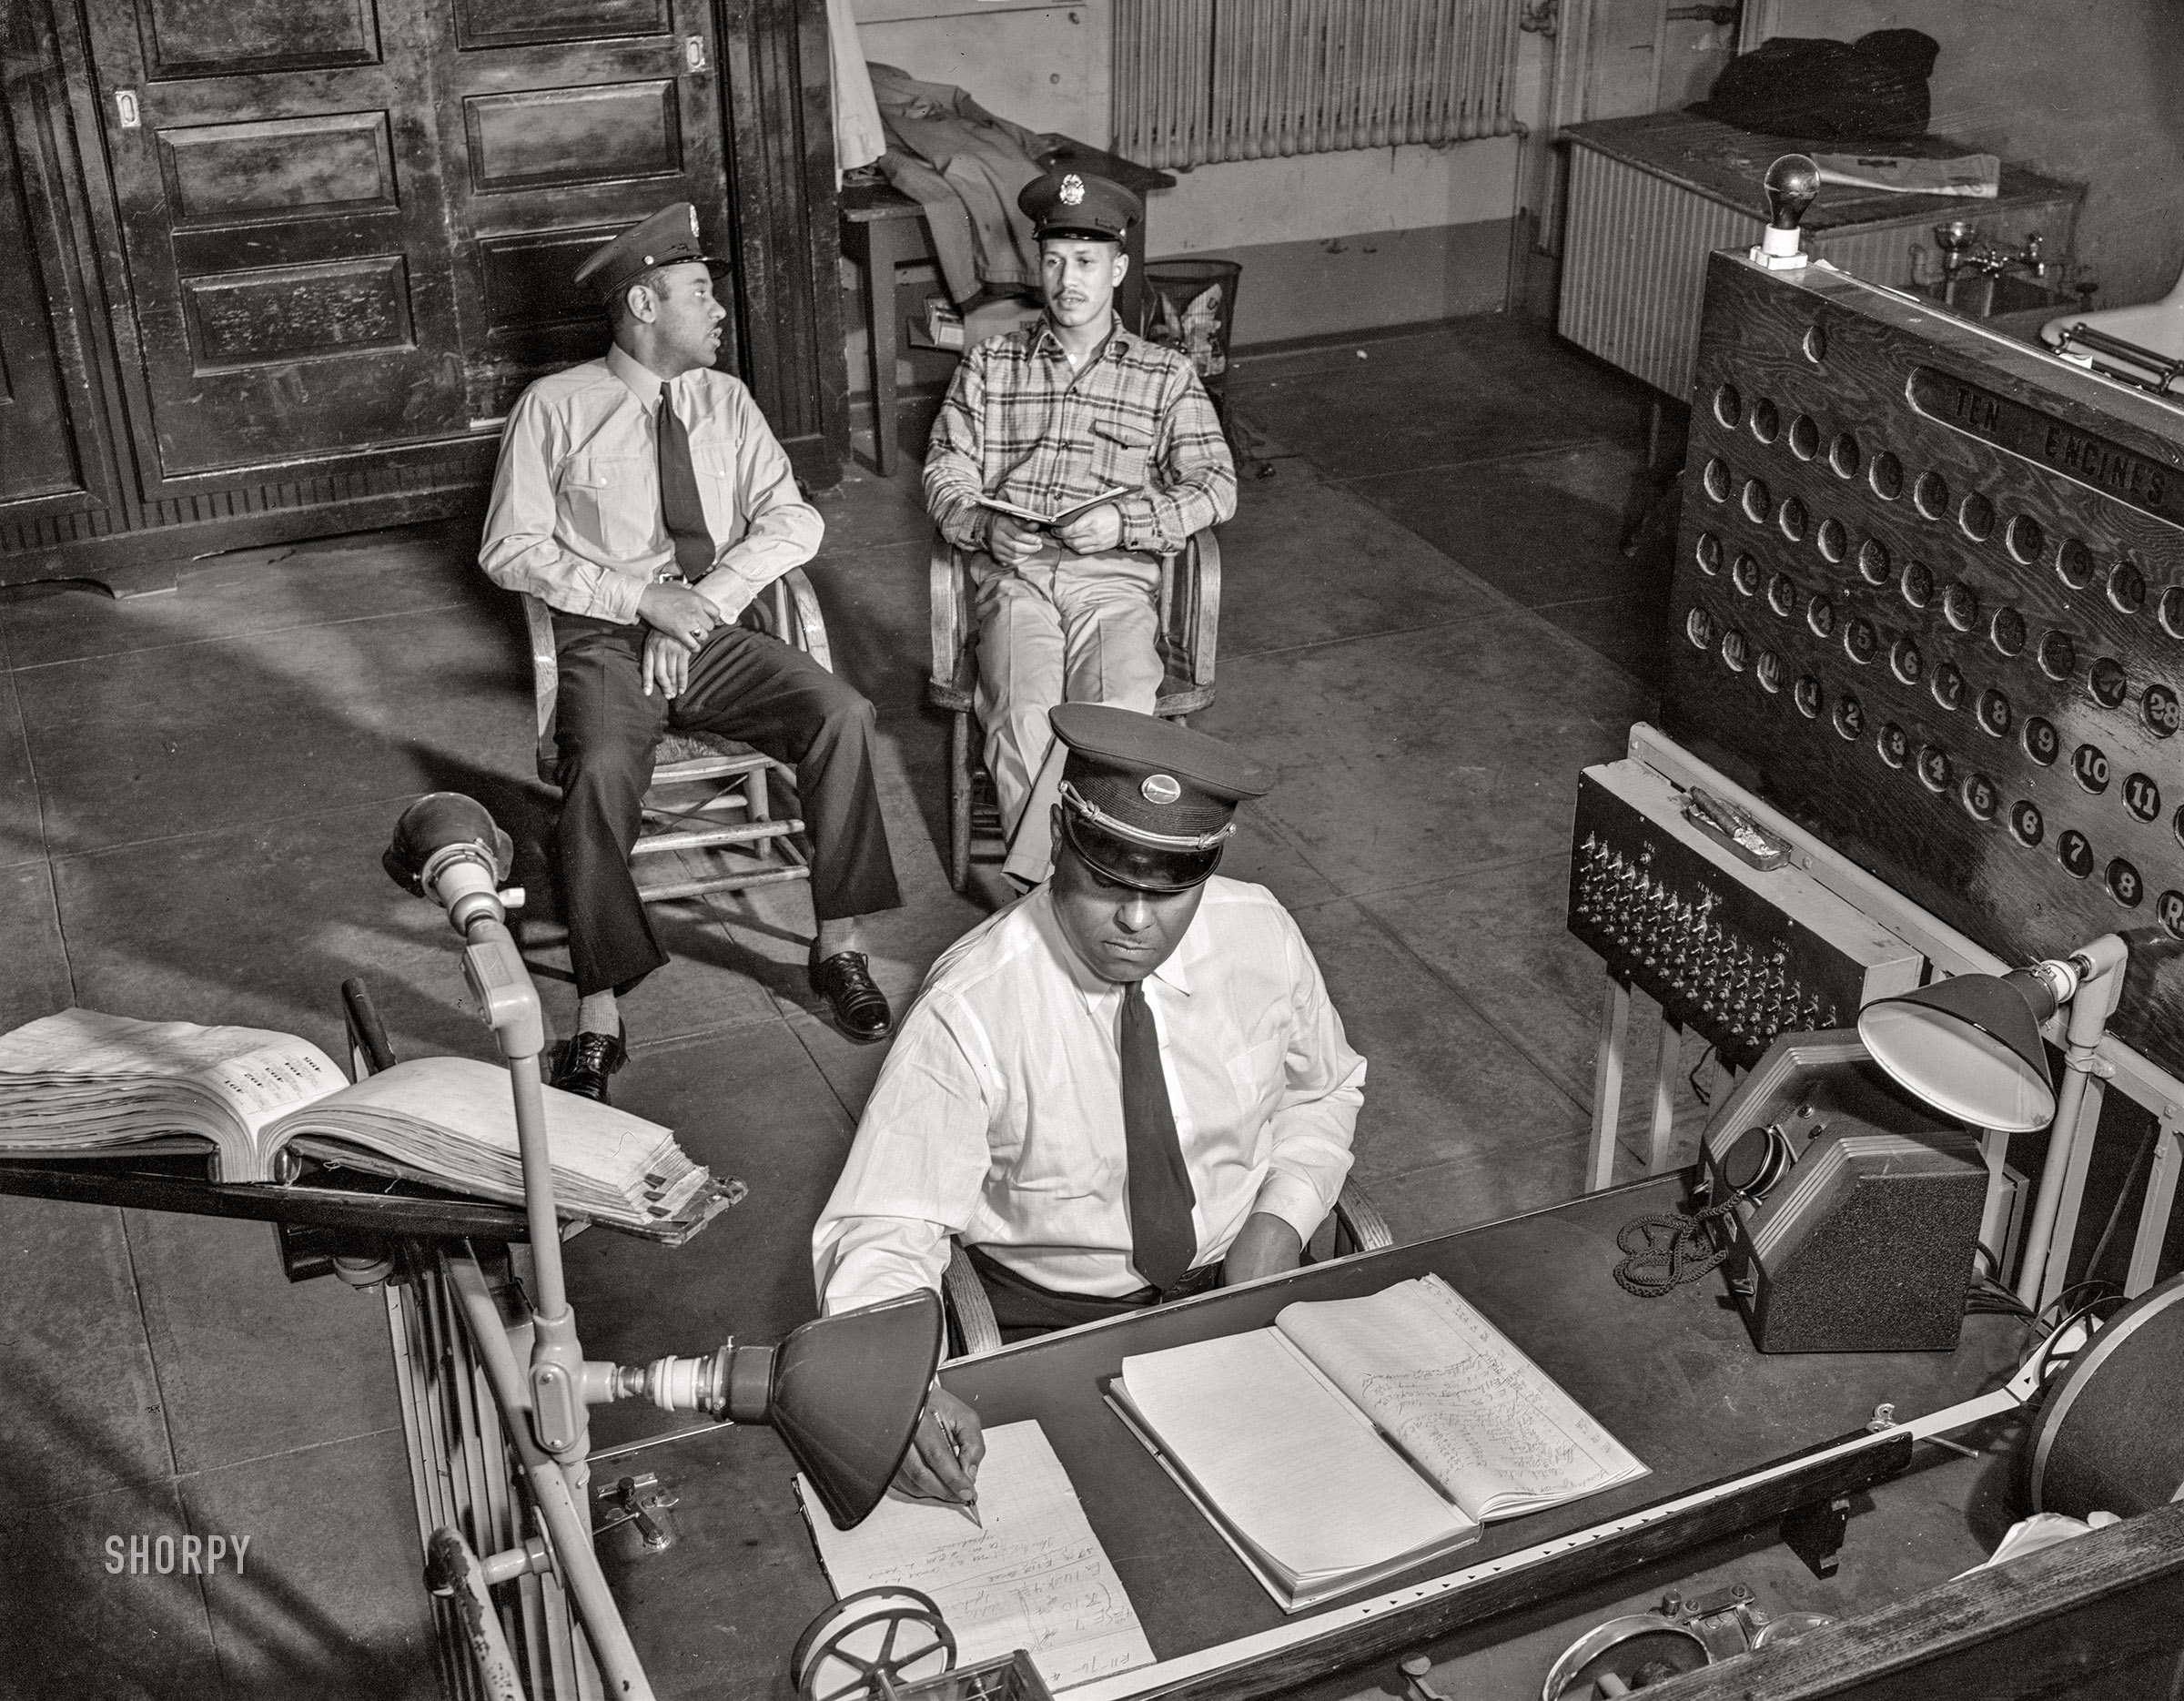 January 1943. Washington, D.C. "Firehouse Station No. 4, one of the separate Negro units in the District. Lieutenant Mills on duty at the alarm desk. Two firemen in the rear quiz each other on the quarterly examinations they must take during their probation period." Acetate negative by Gordon Parks for the Office of War Information. View full size.